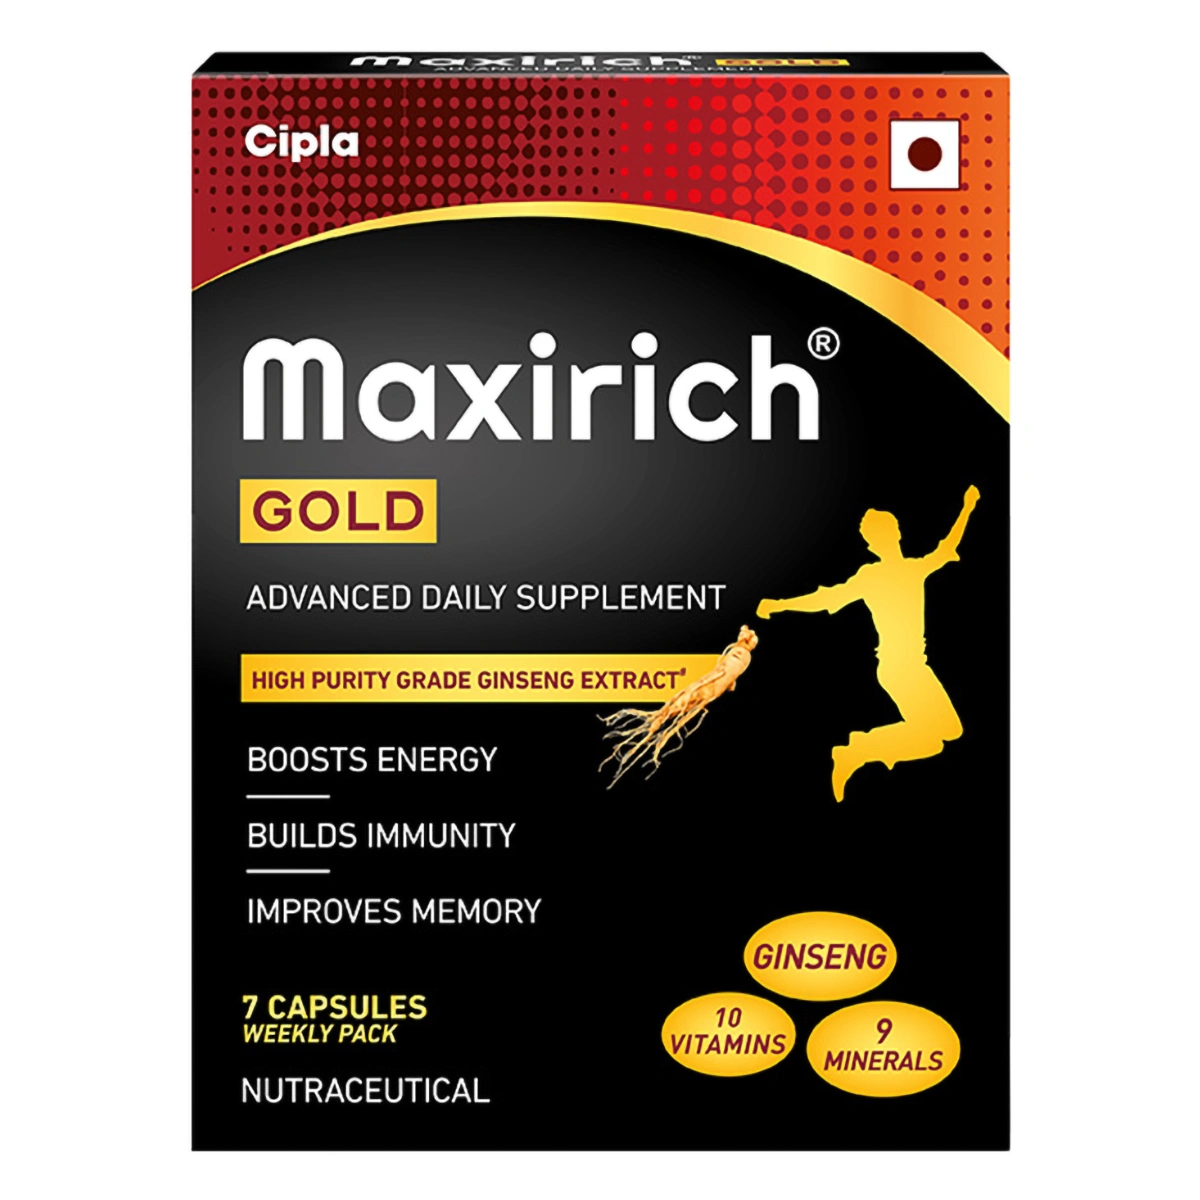 Maxirich Gold Daily Supplement with Ginseng Extract | Multivitamin for Energy, Immunity & Memory